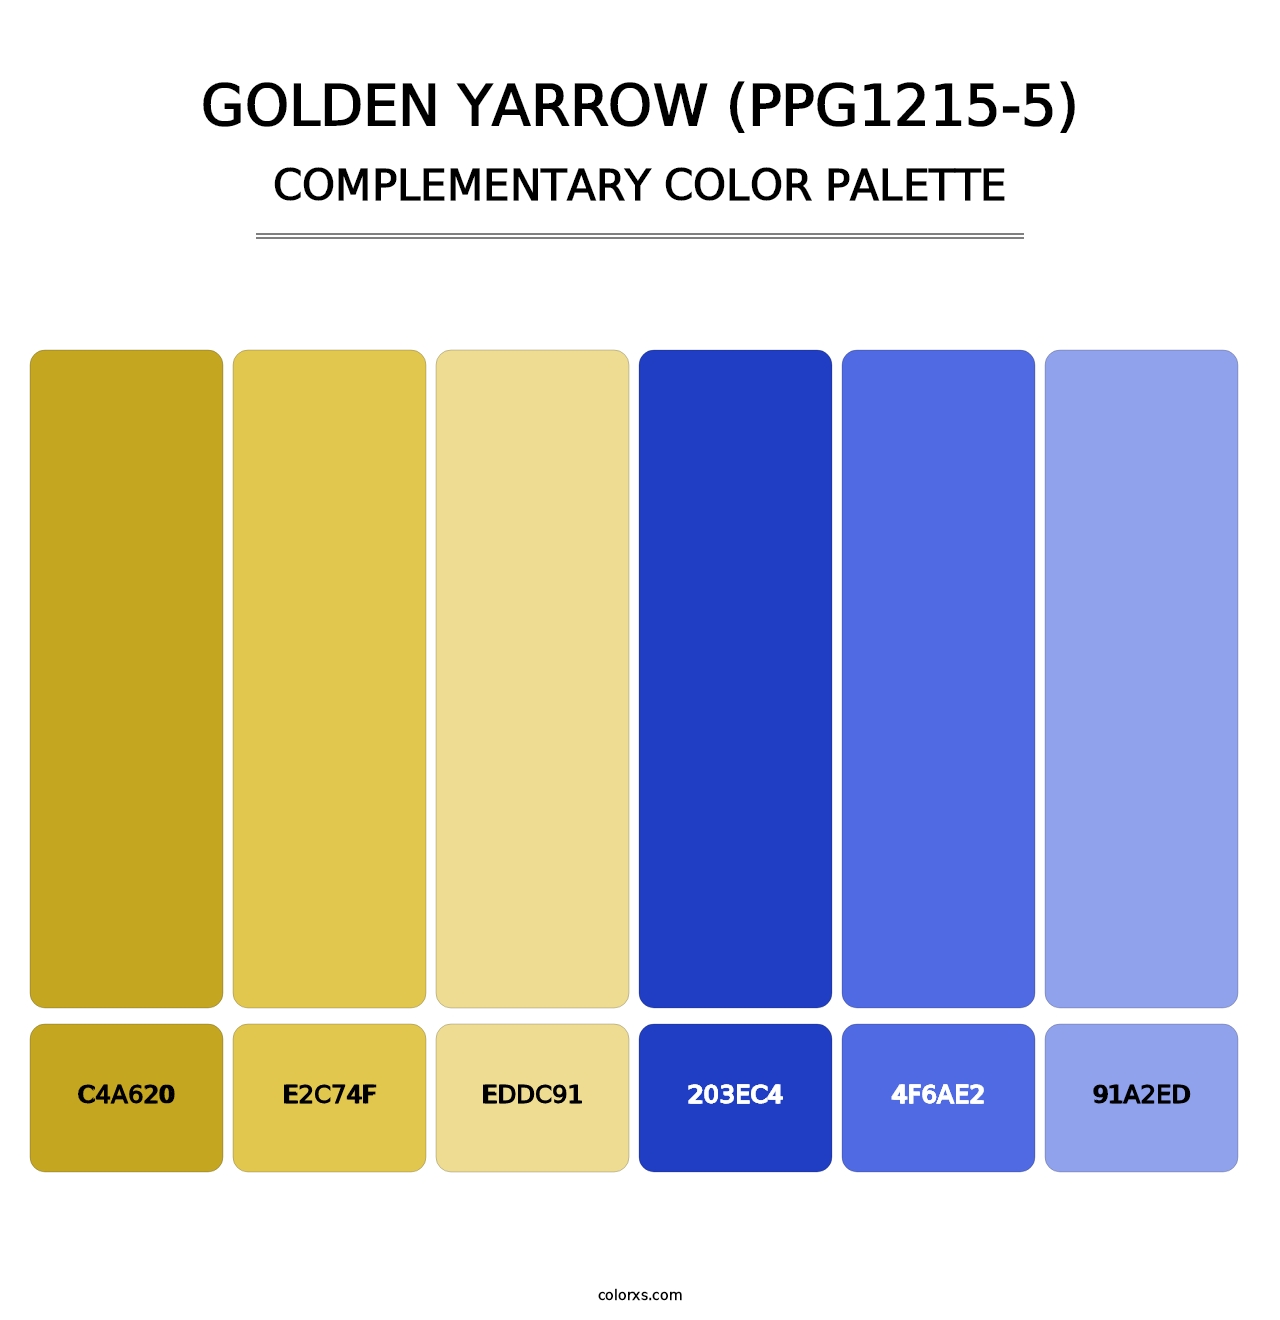 Golden Yarrow (PPG1215-5) - Complementary Color Palette